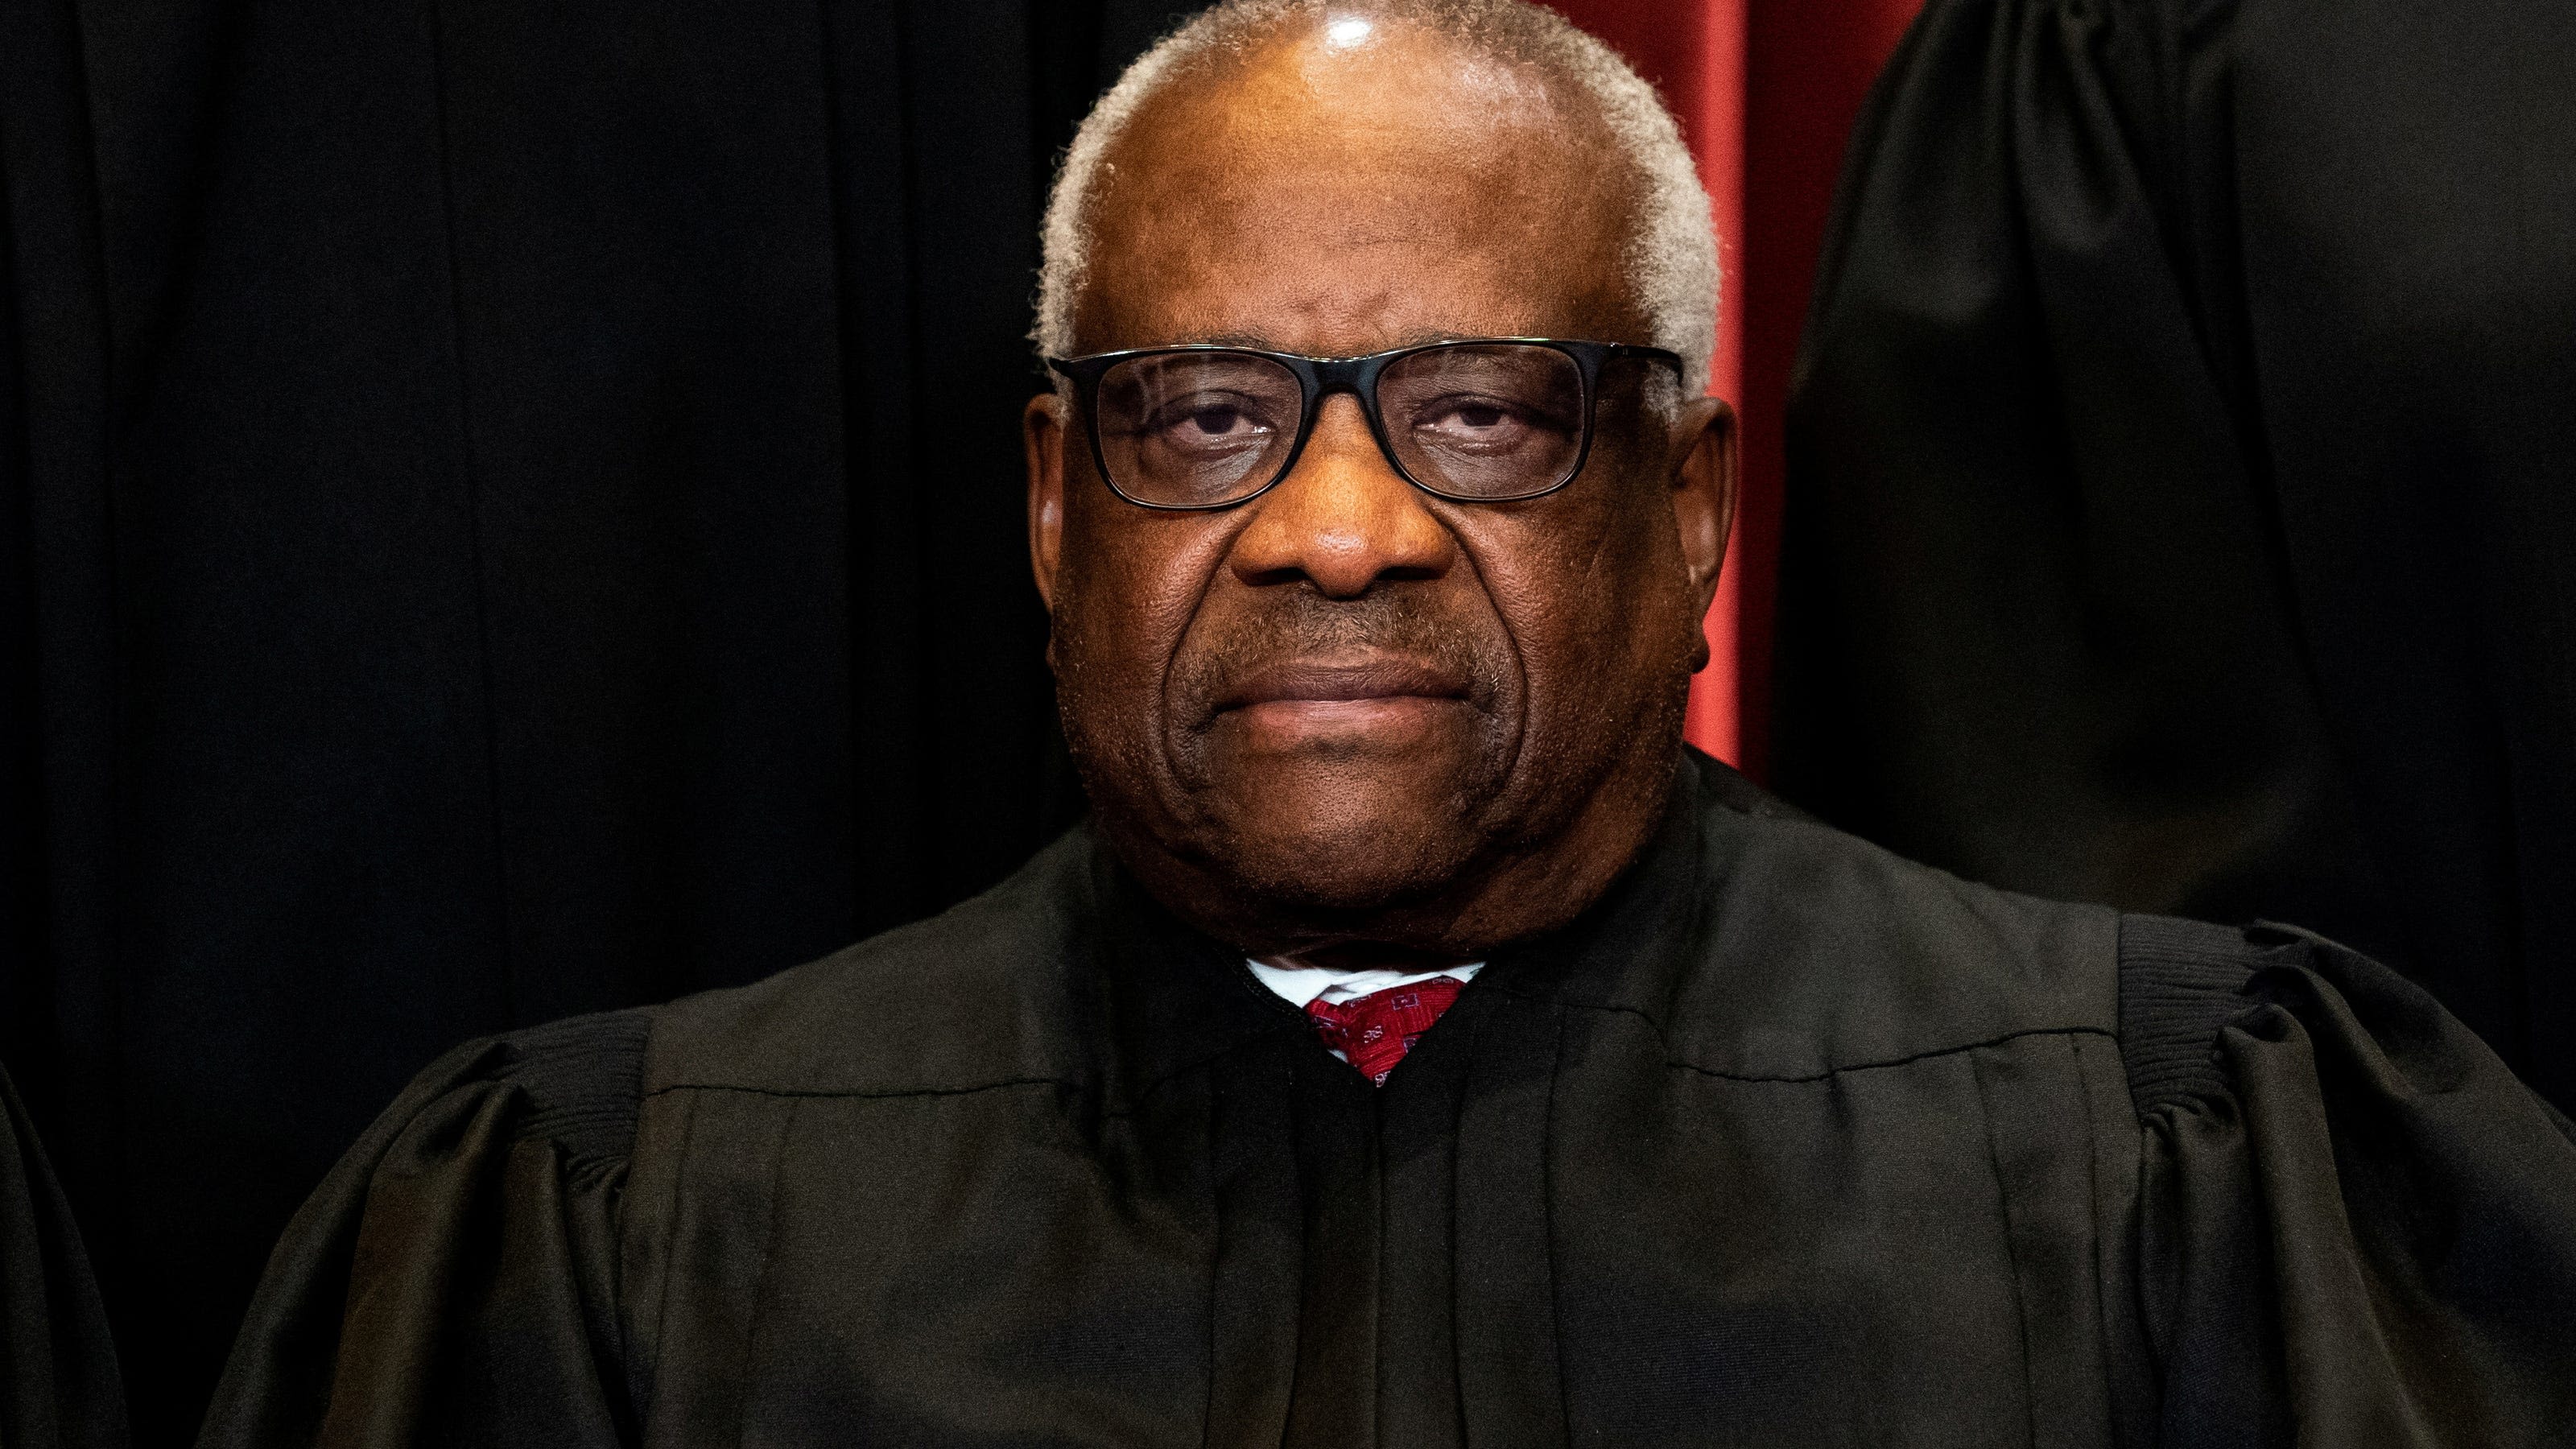 Clarence Thomas criticizes Brown v. Board of Education. It comes at an awkward moment